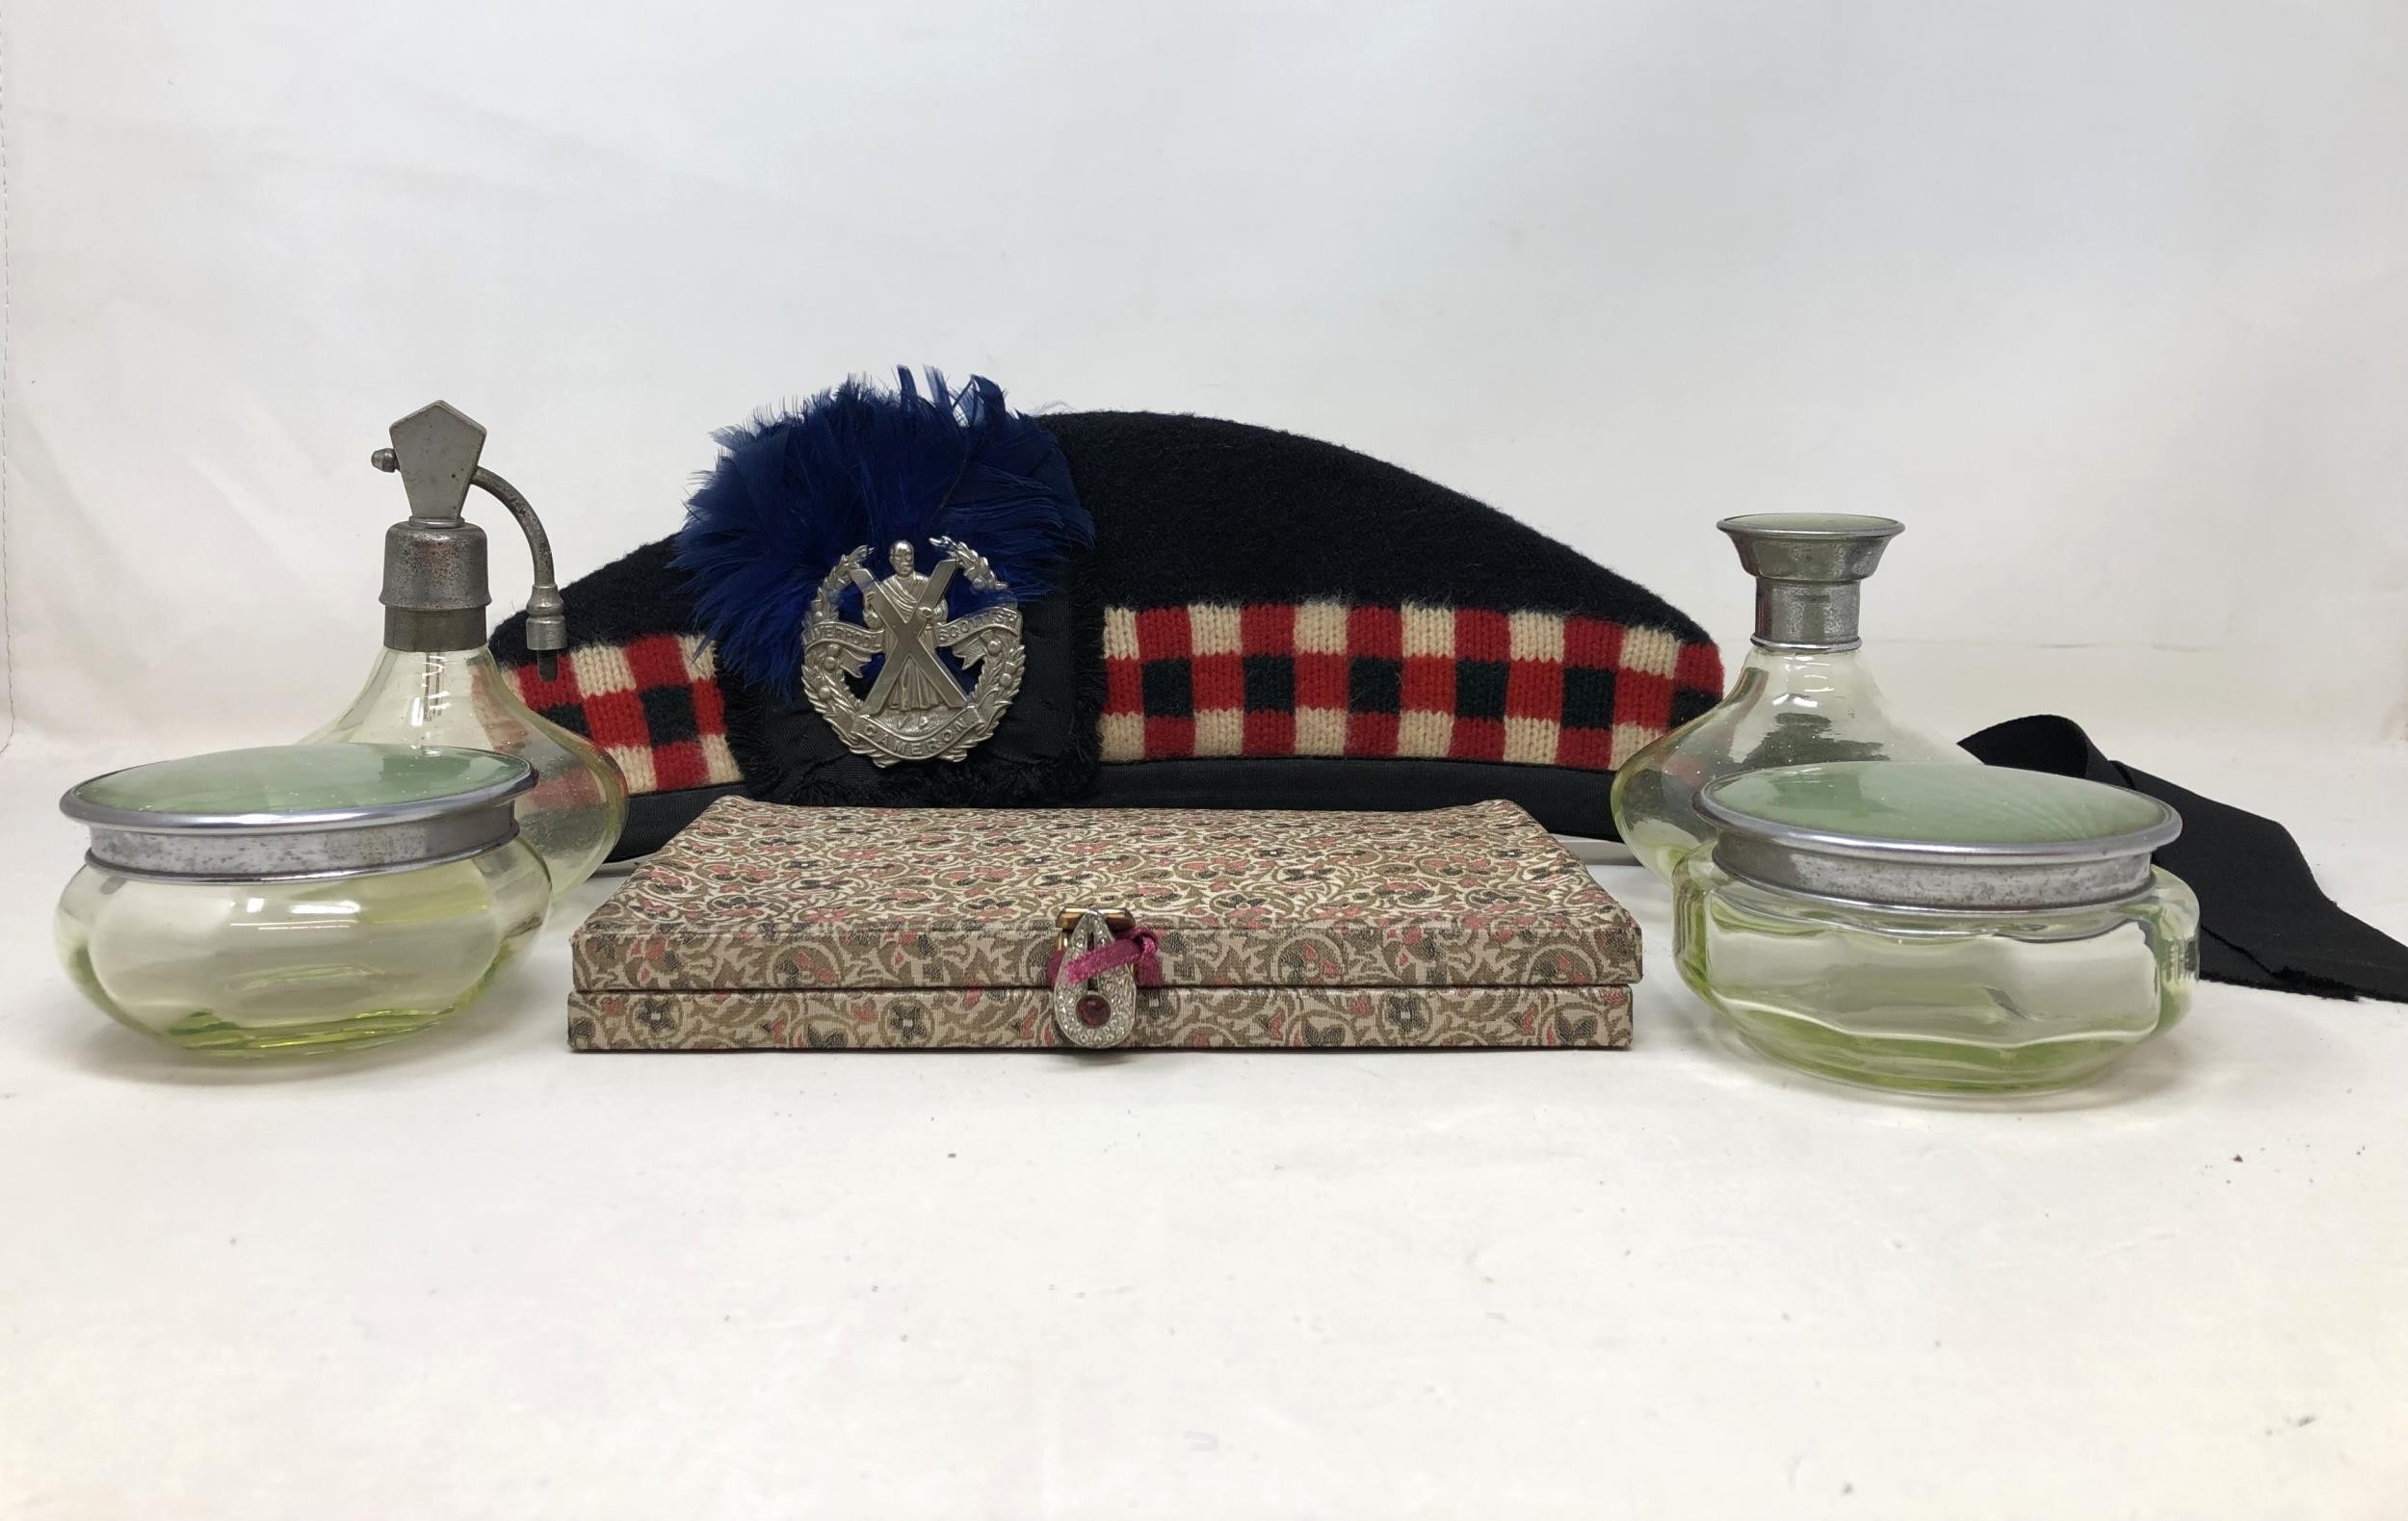 An Art Deco style silk purse, a Glengarry hat, and part of a dressing table set Provenance: Sold - Image 2 of 2